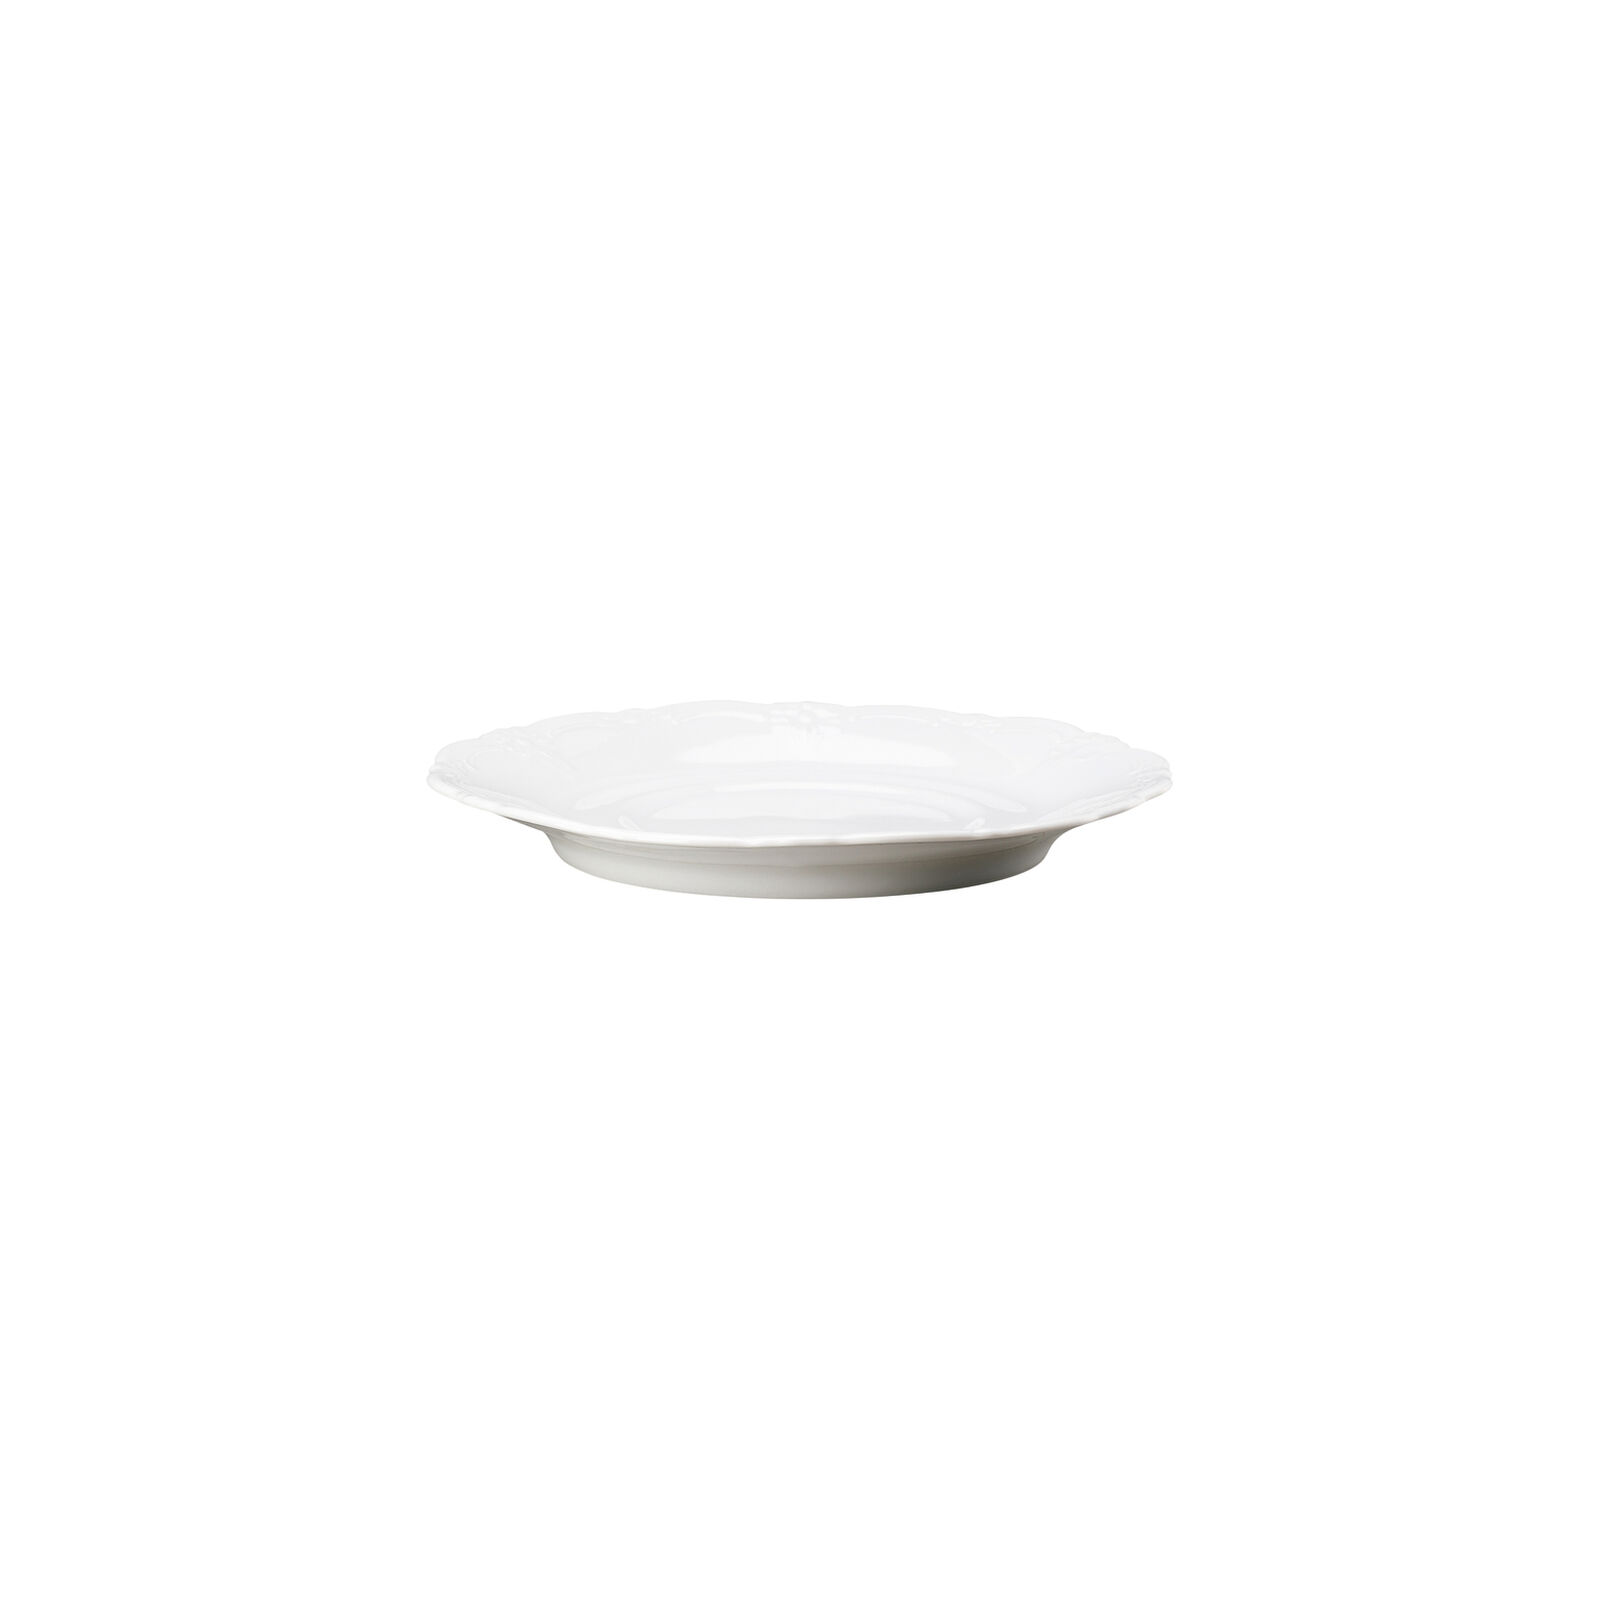 Baronesse saucer, Porcelain, Hutschenreuther Creamsoup Weiss